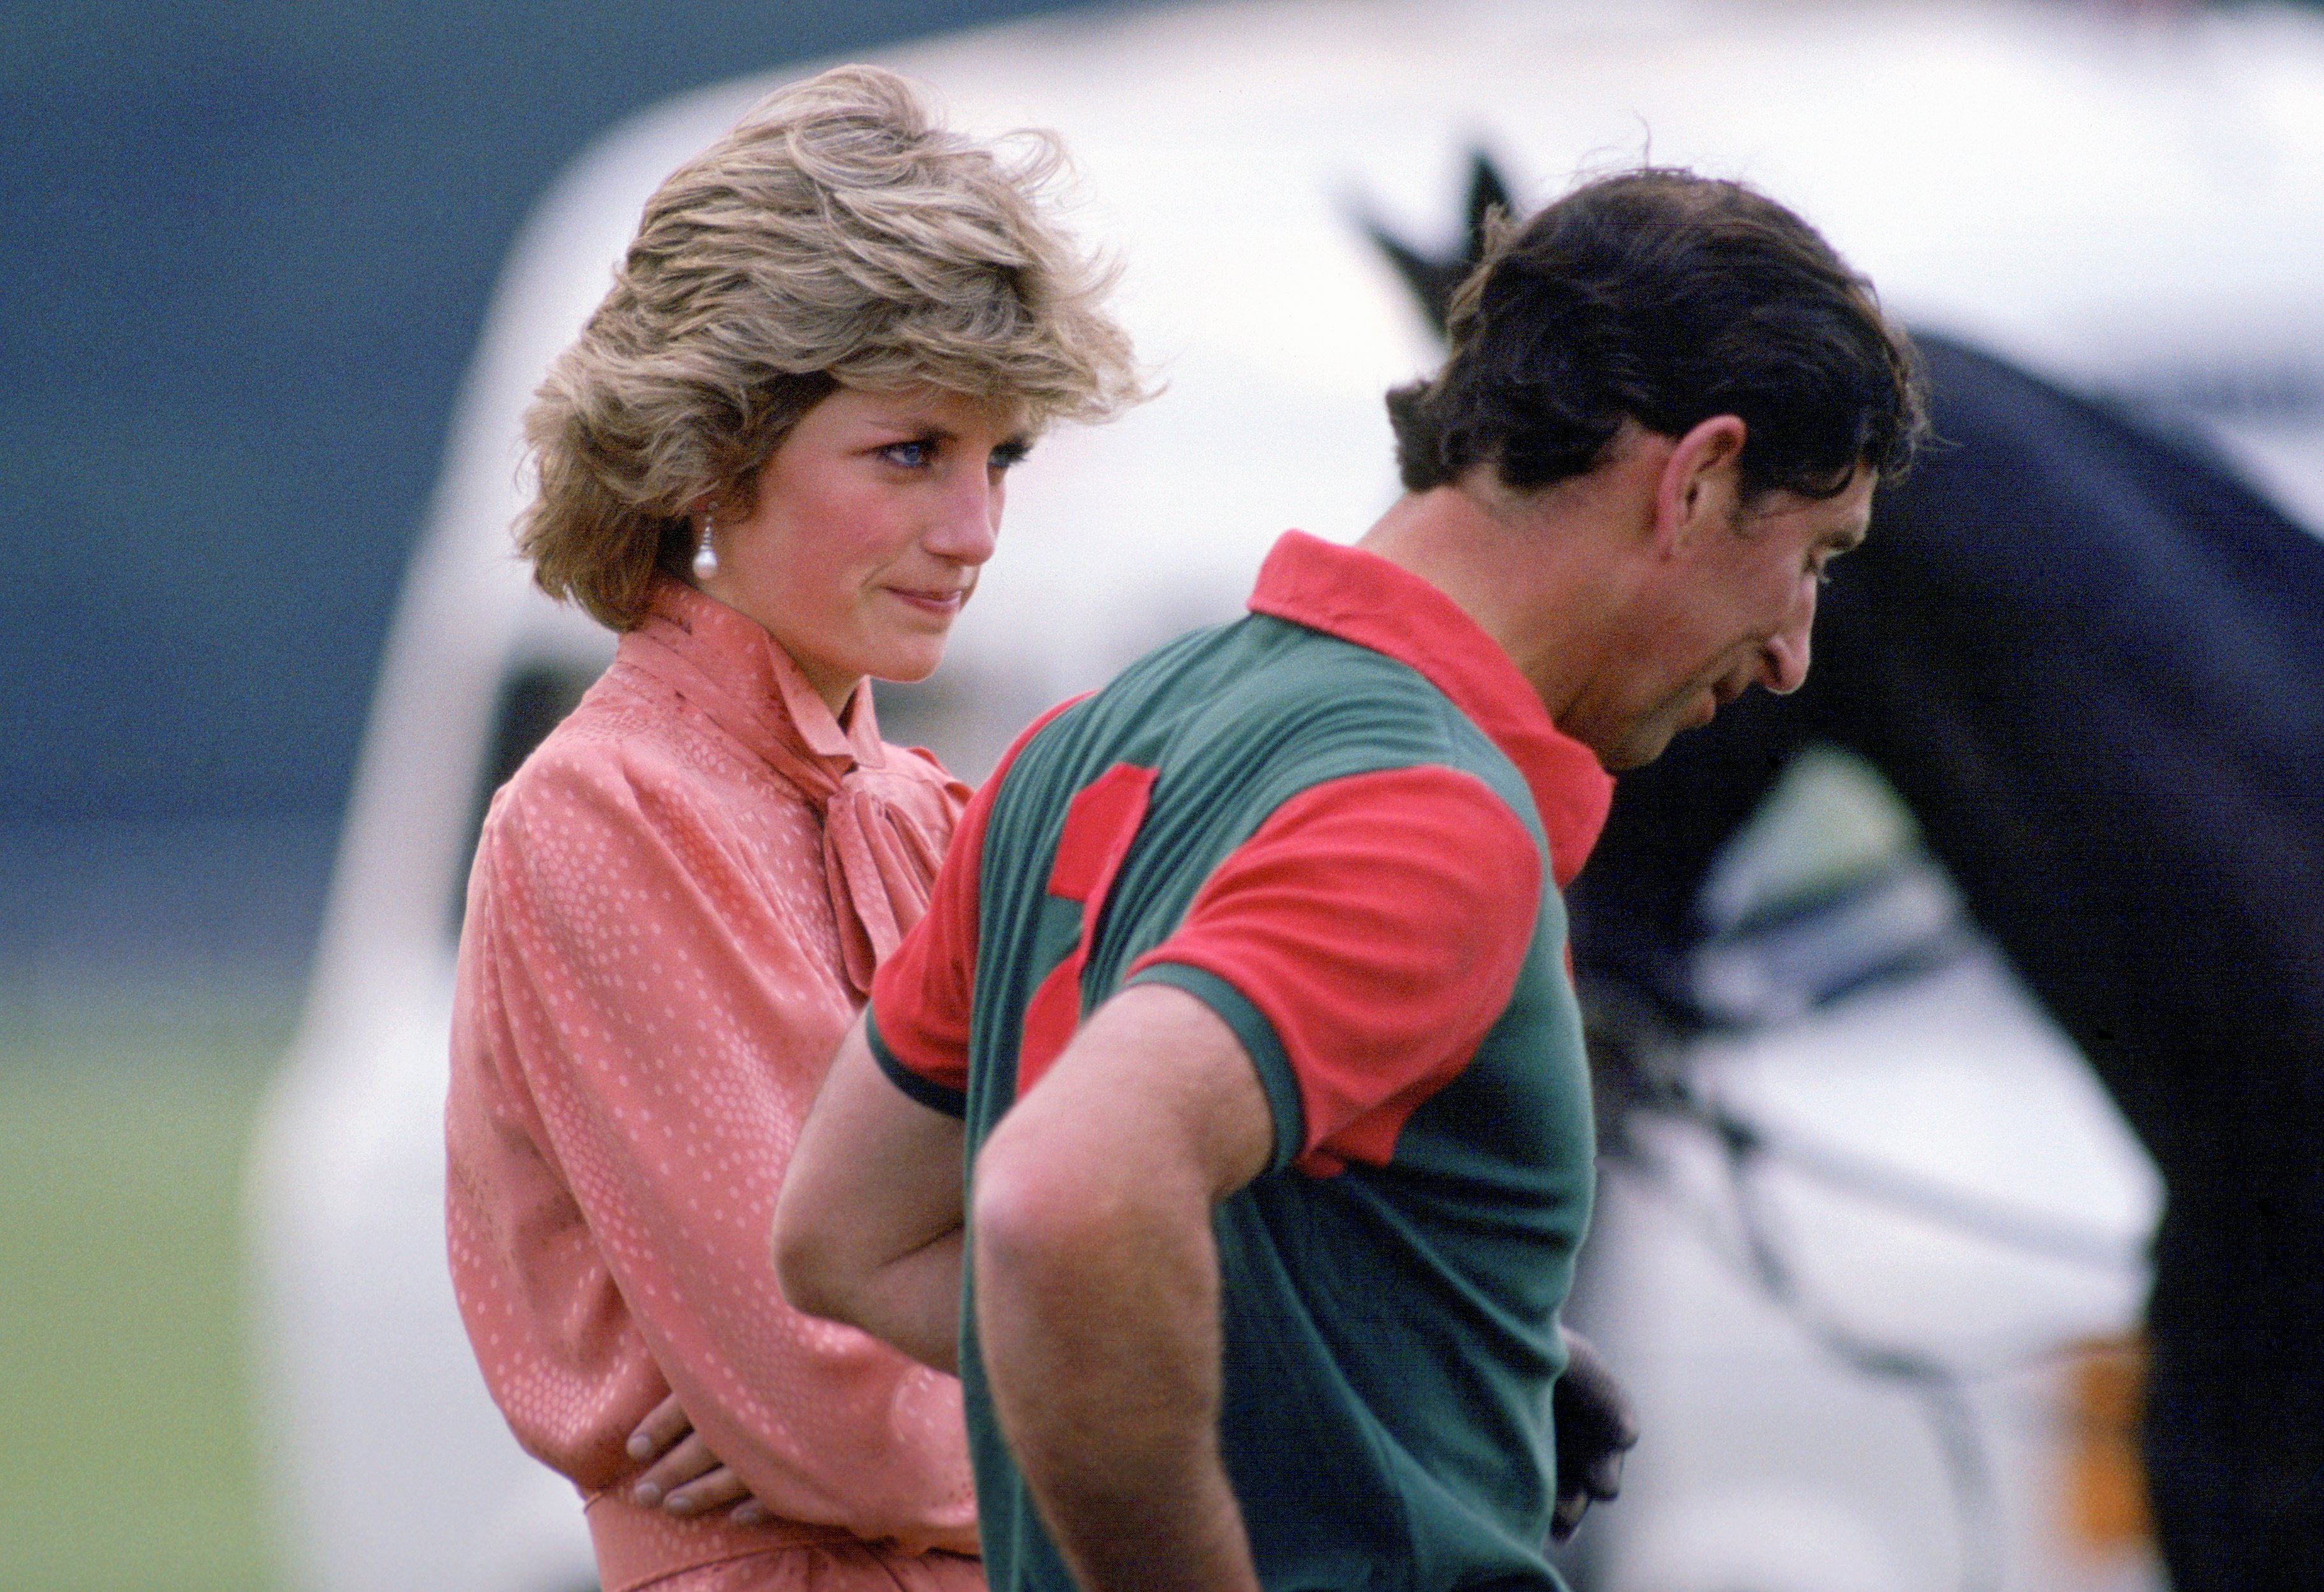 Princess Diana and Prince Charles looking upset while at Smith's Lawn Polo Club